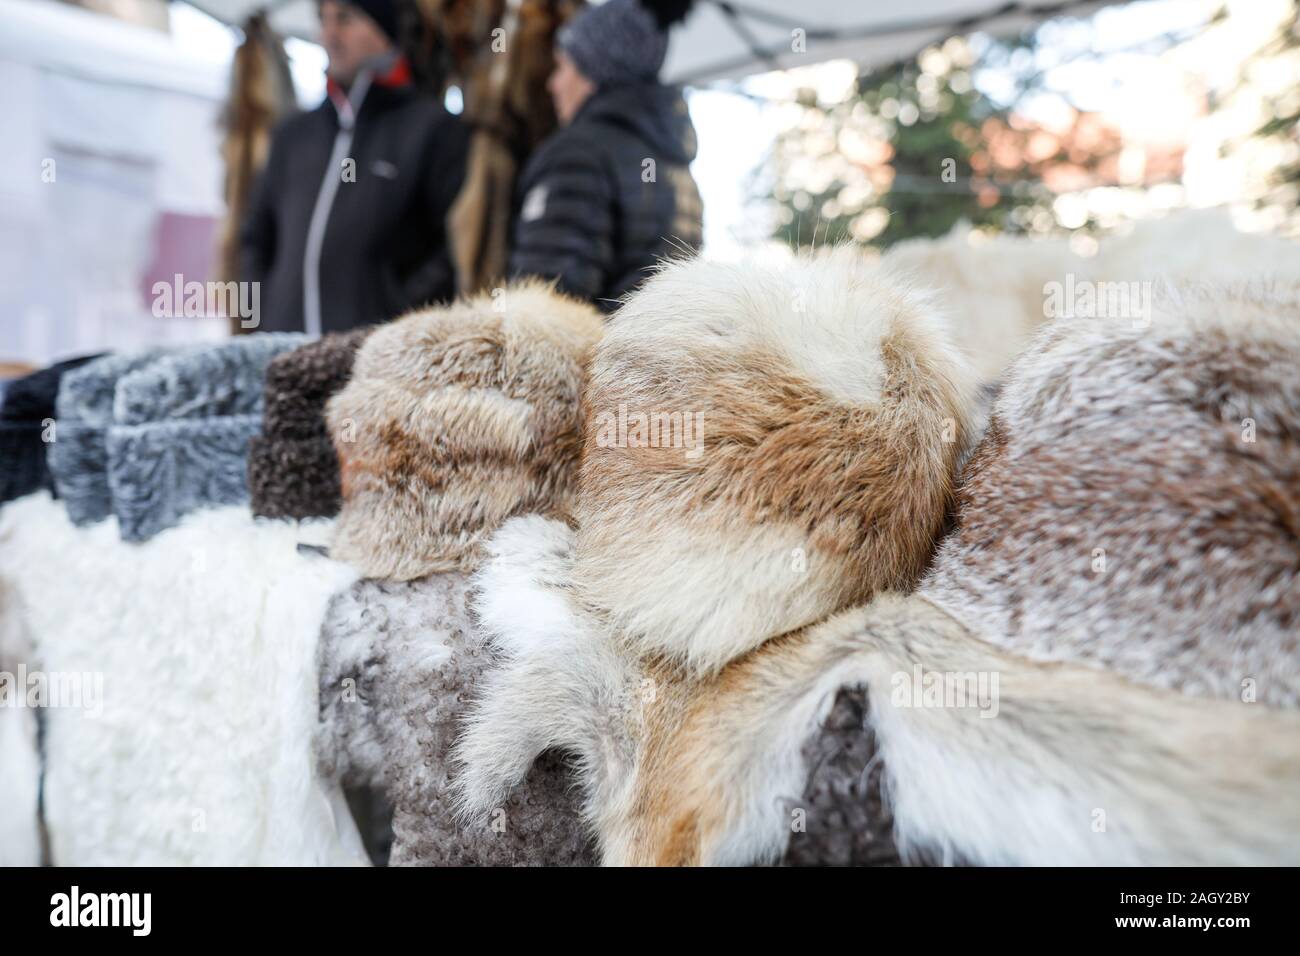 Fur hats and other animals furs on exhibition at a peasants fair in Bucharest, Romania. Stock Photo